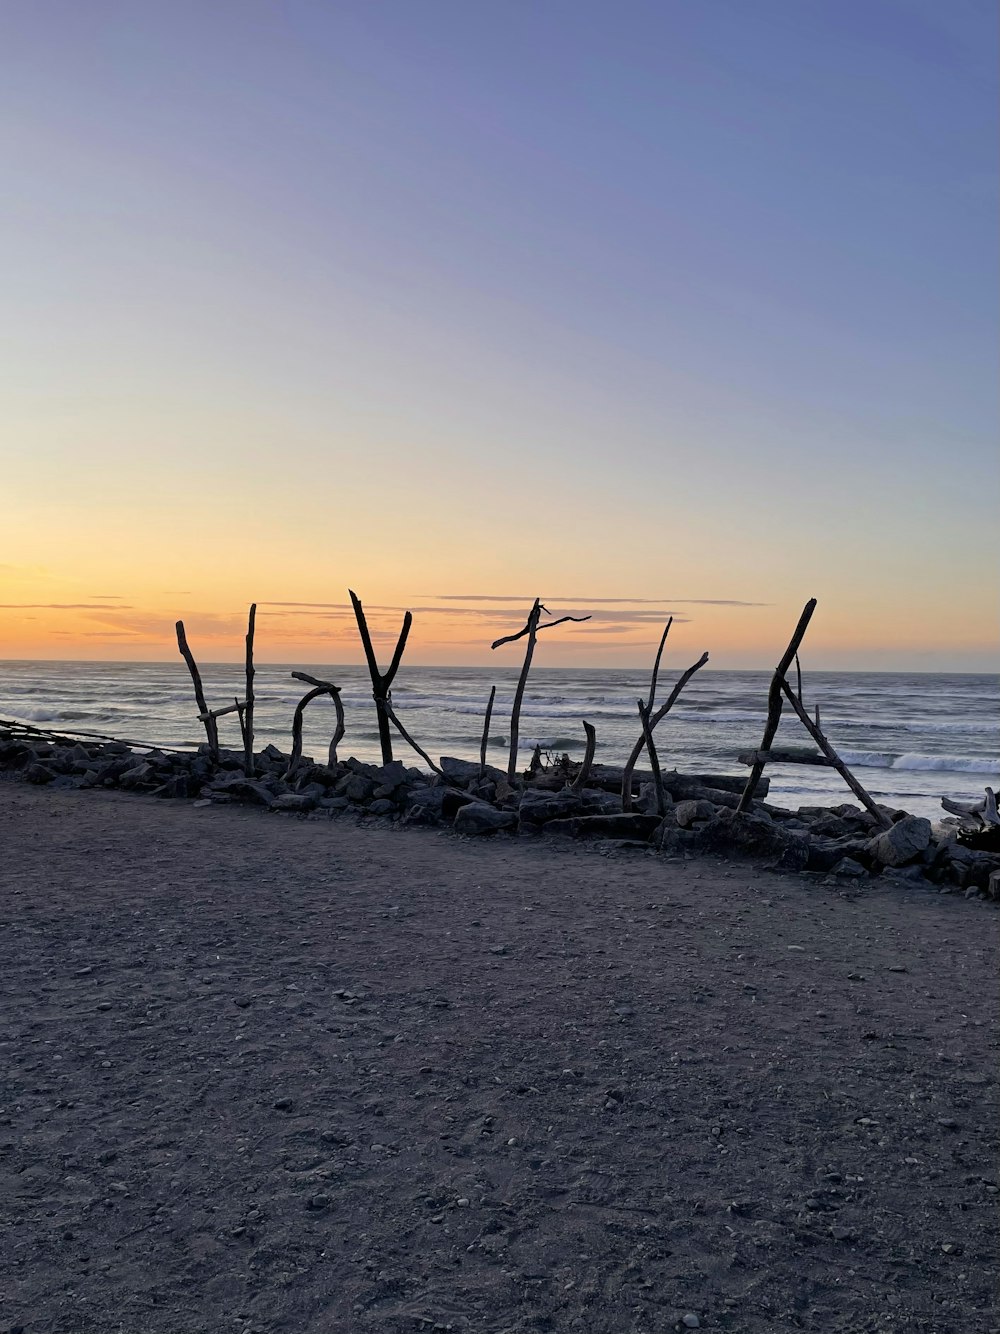 a beach at sunset with driftwood on the shore